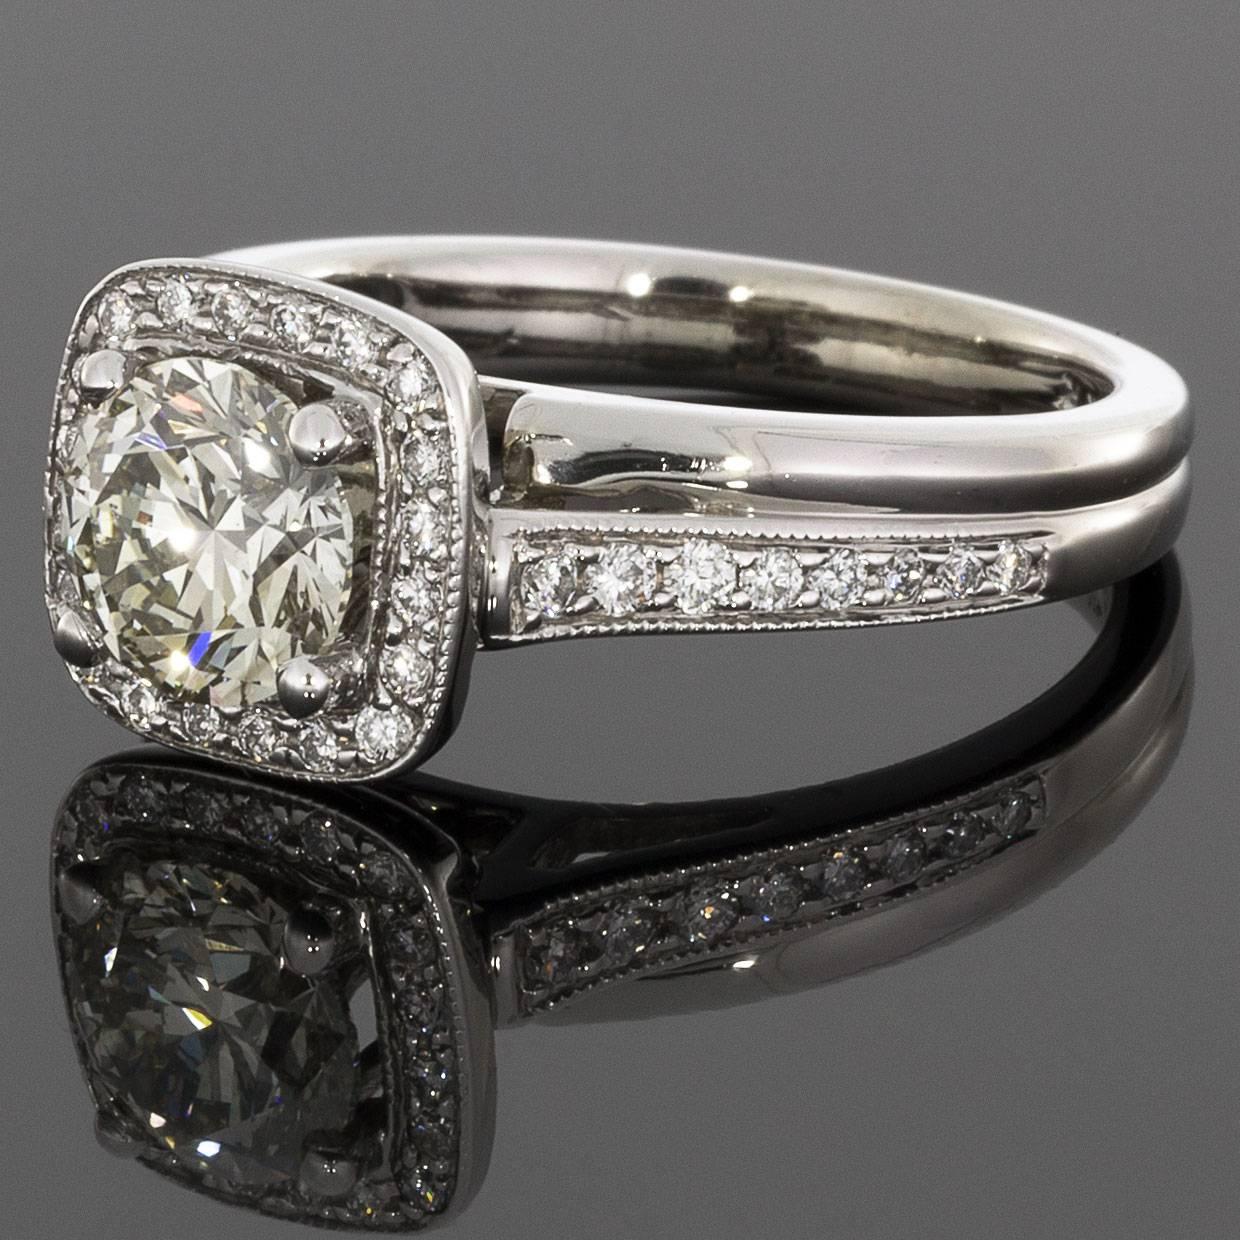 This beautiful engagement ring has a unique & beautiful bypass halo design. The ring features a round brilliant cut diamond center that weighs approximately 1.25 carat & grades as M/SI1 in quality. This glistening diamond is surrounded by a